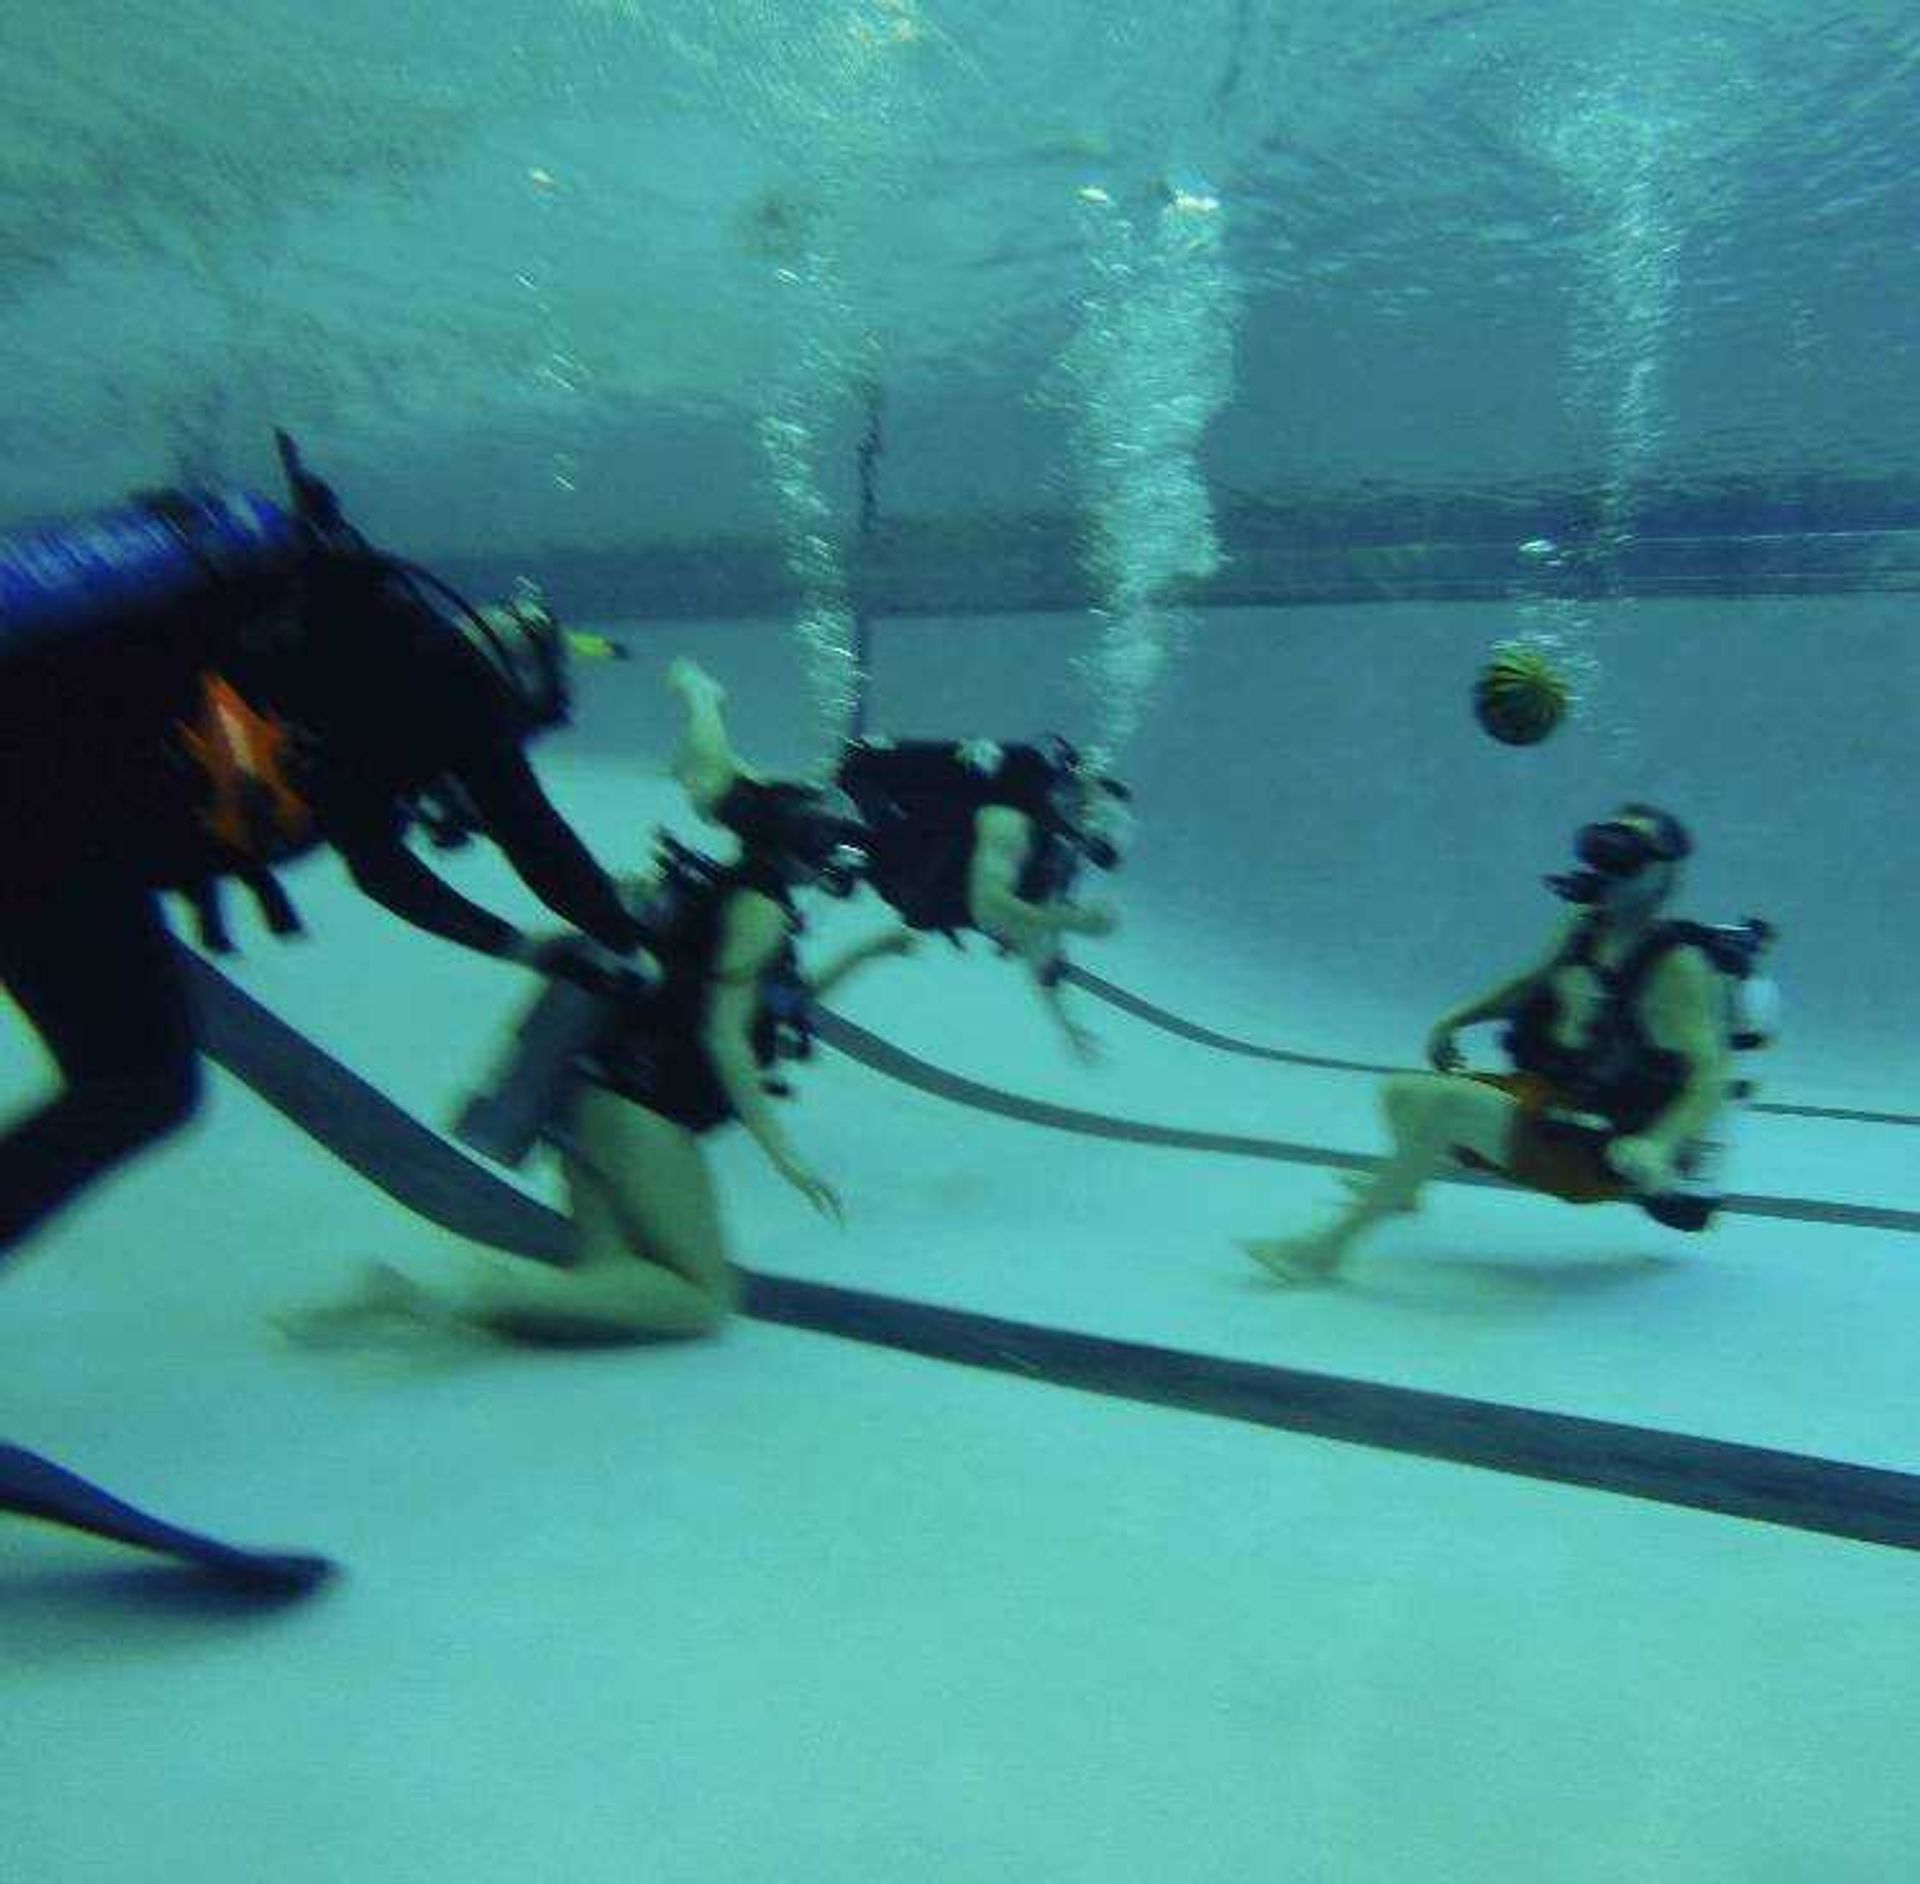 Amanda Milbrandt and Tori Wright taking part in games while scuba diving at the Student Aquatic Center.